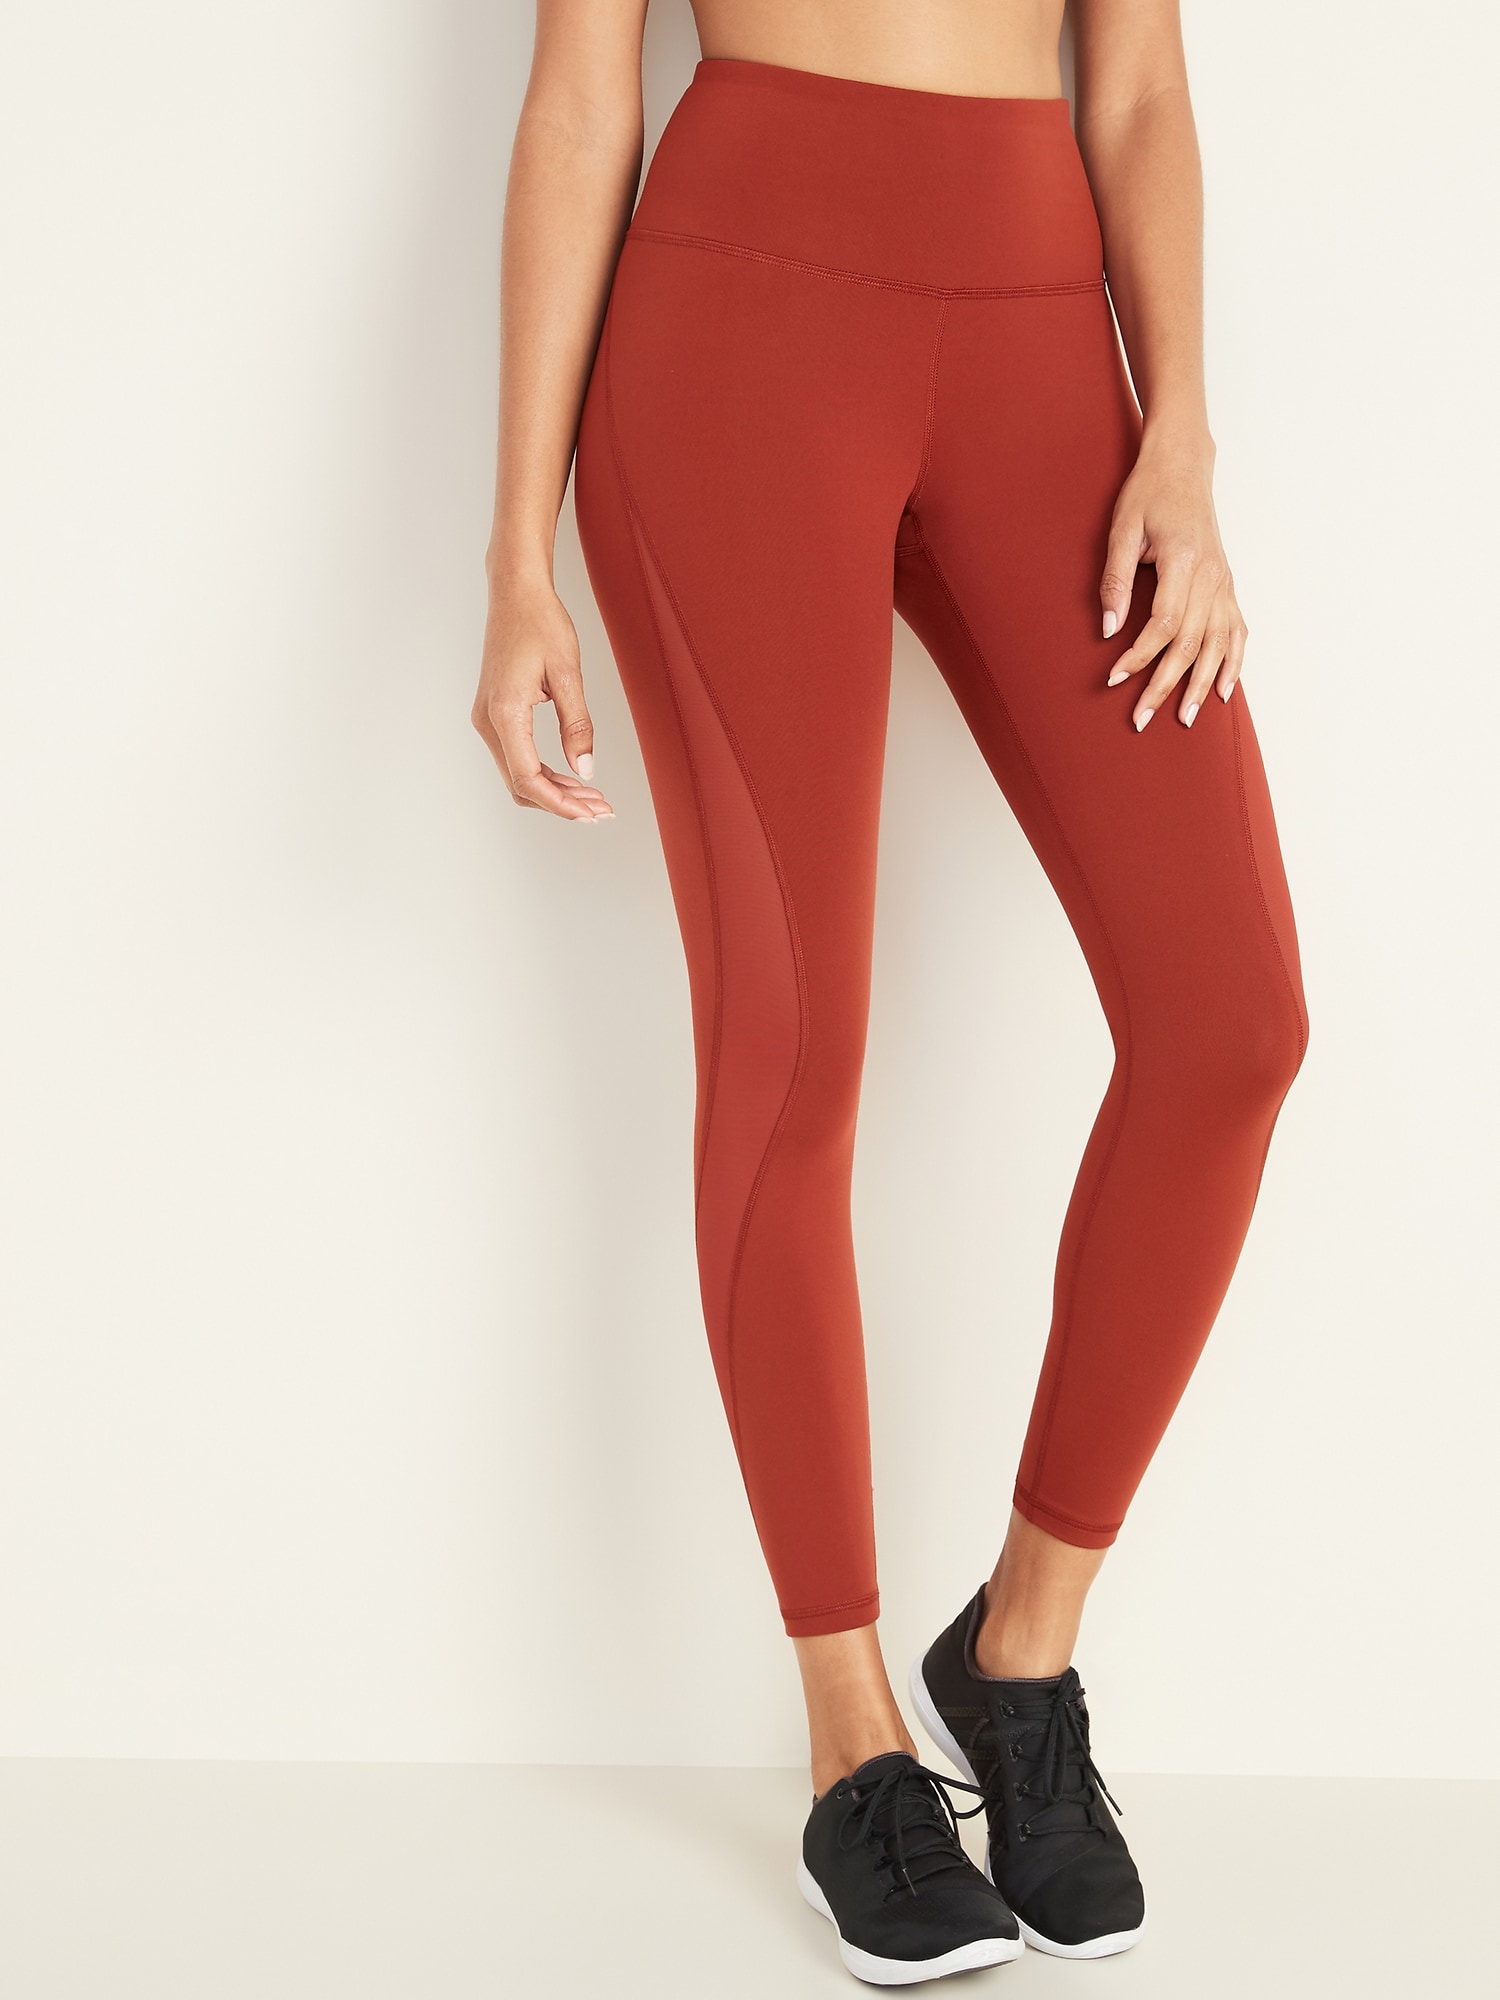 High-Rise Elevate Compression Leggings for Women